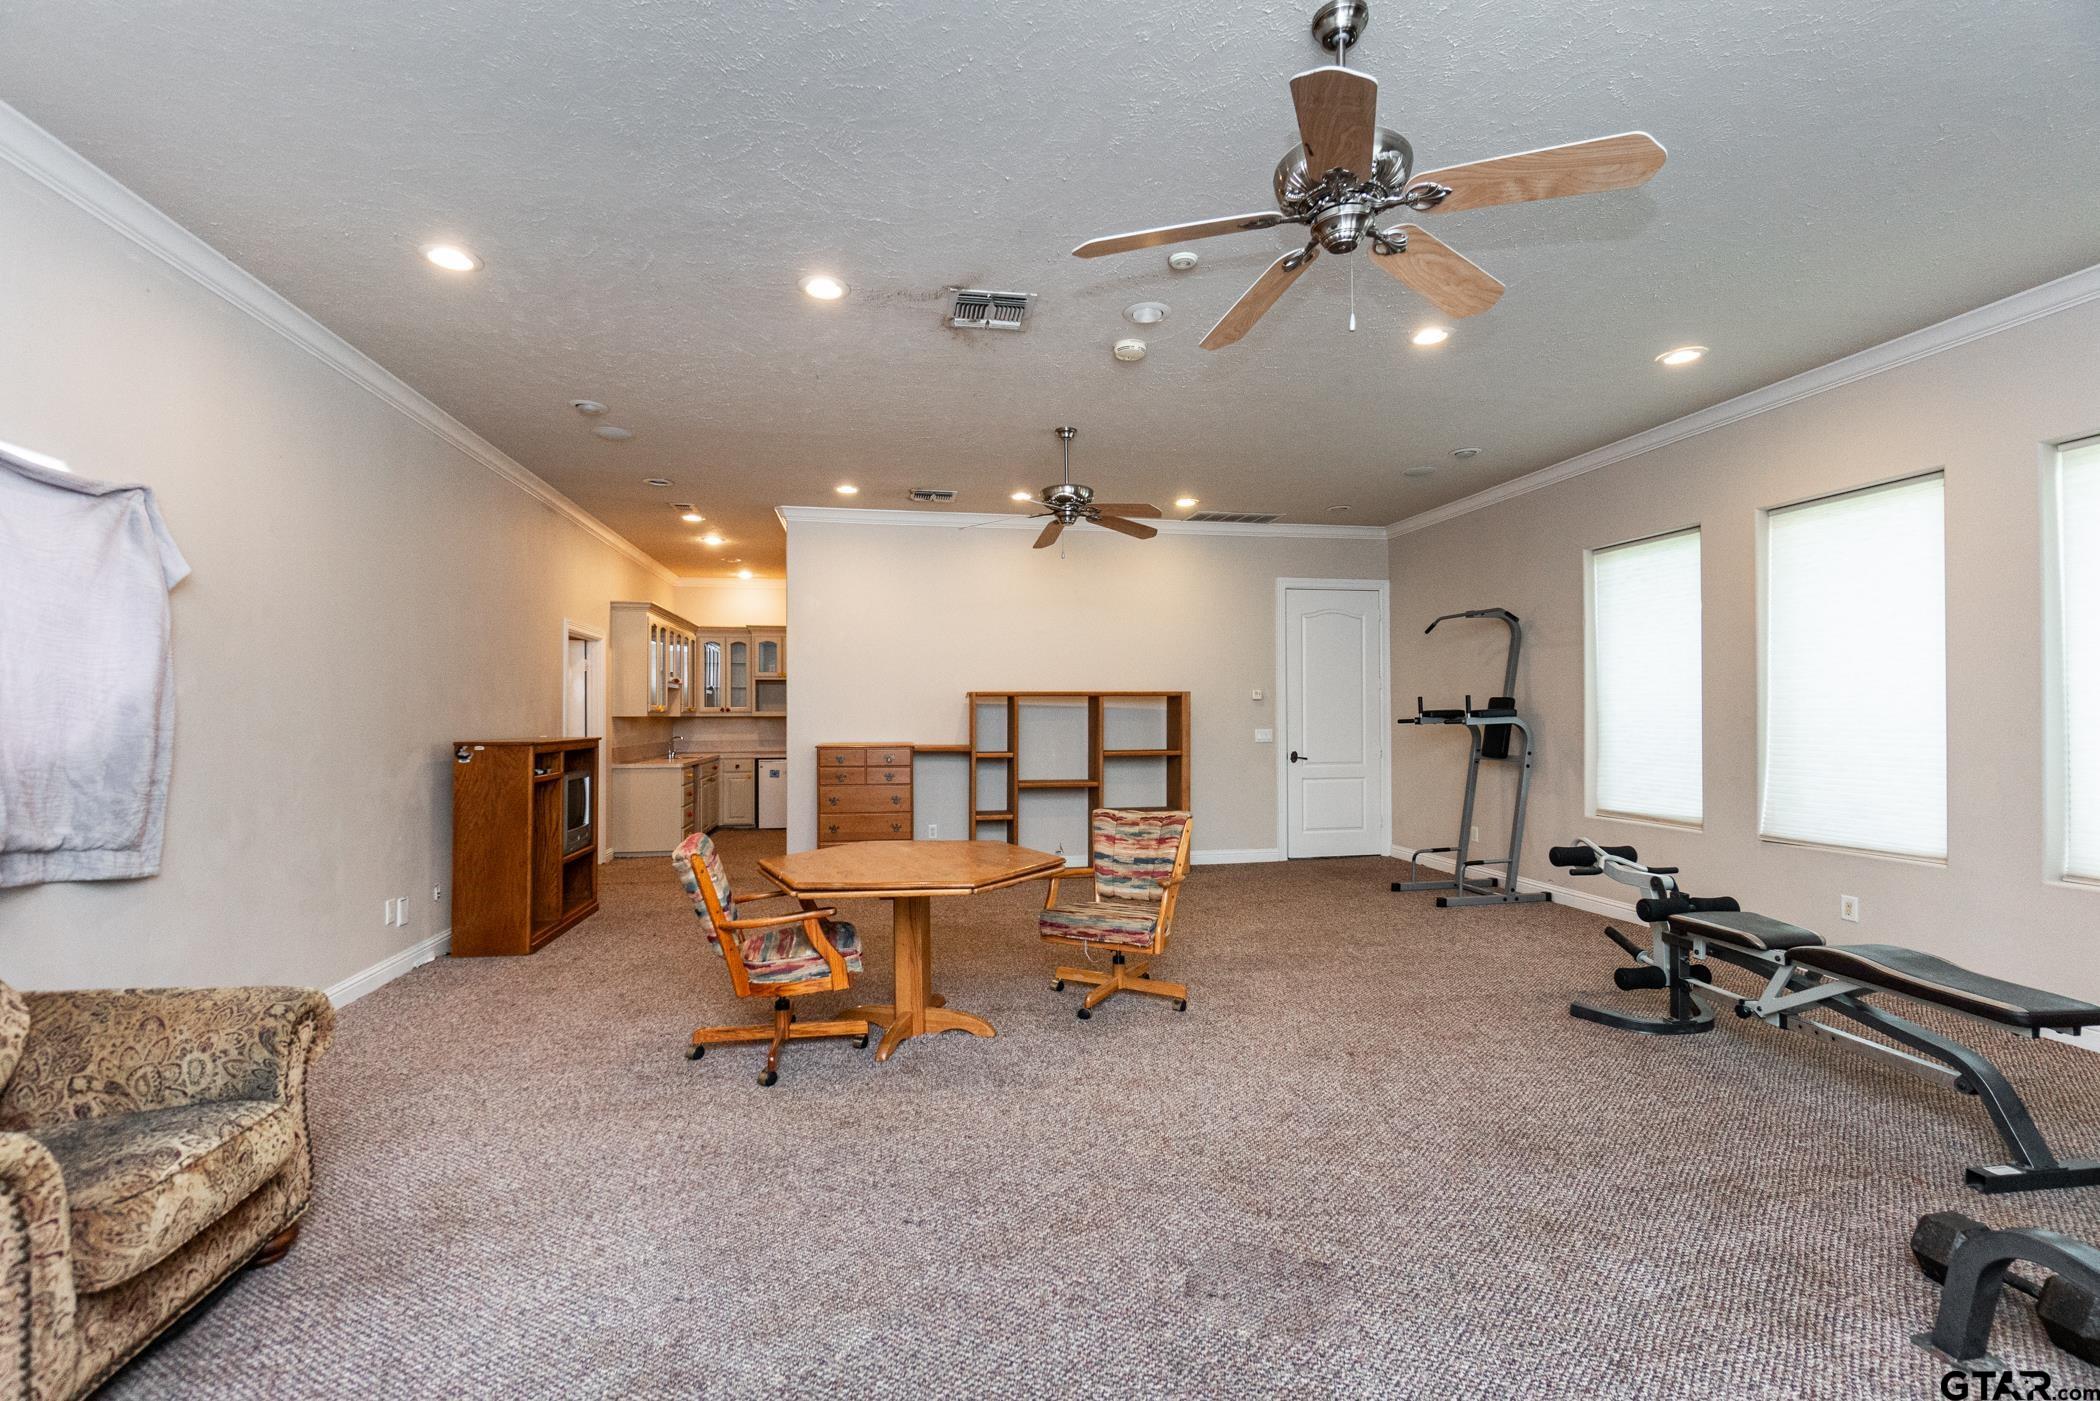 2nd floor includes family room/game room, bedroom, kitchen, full bathroom & attic access.